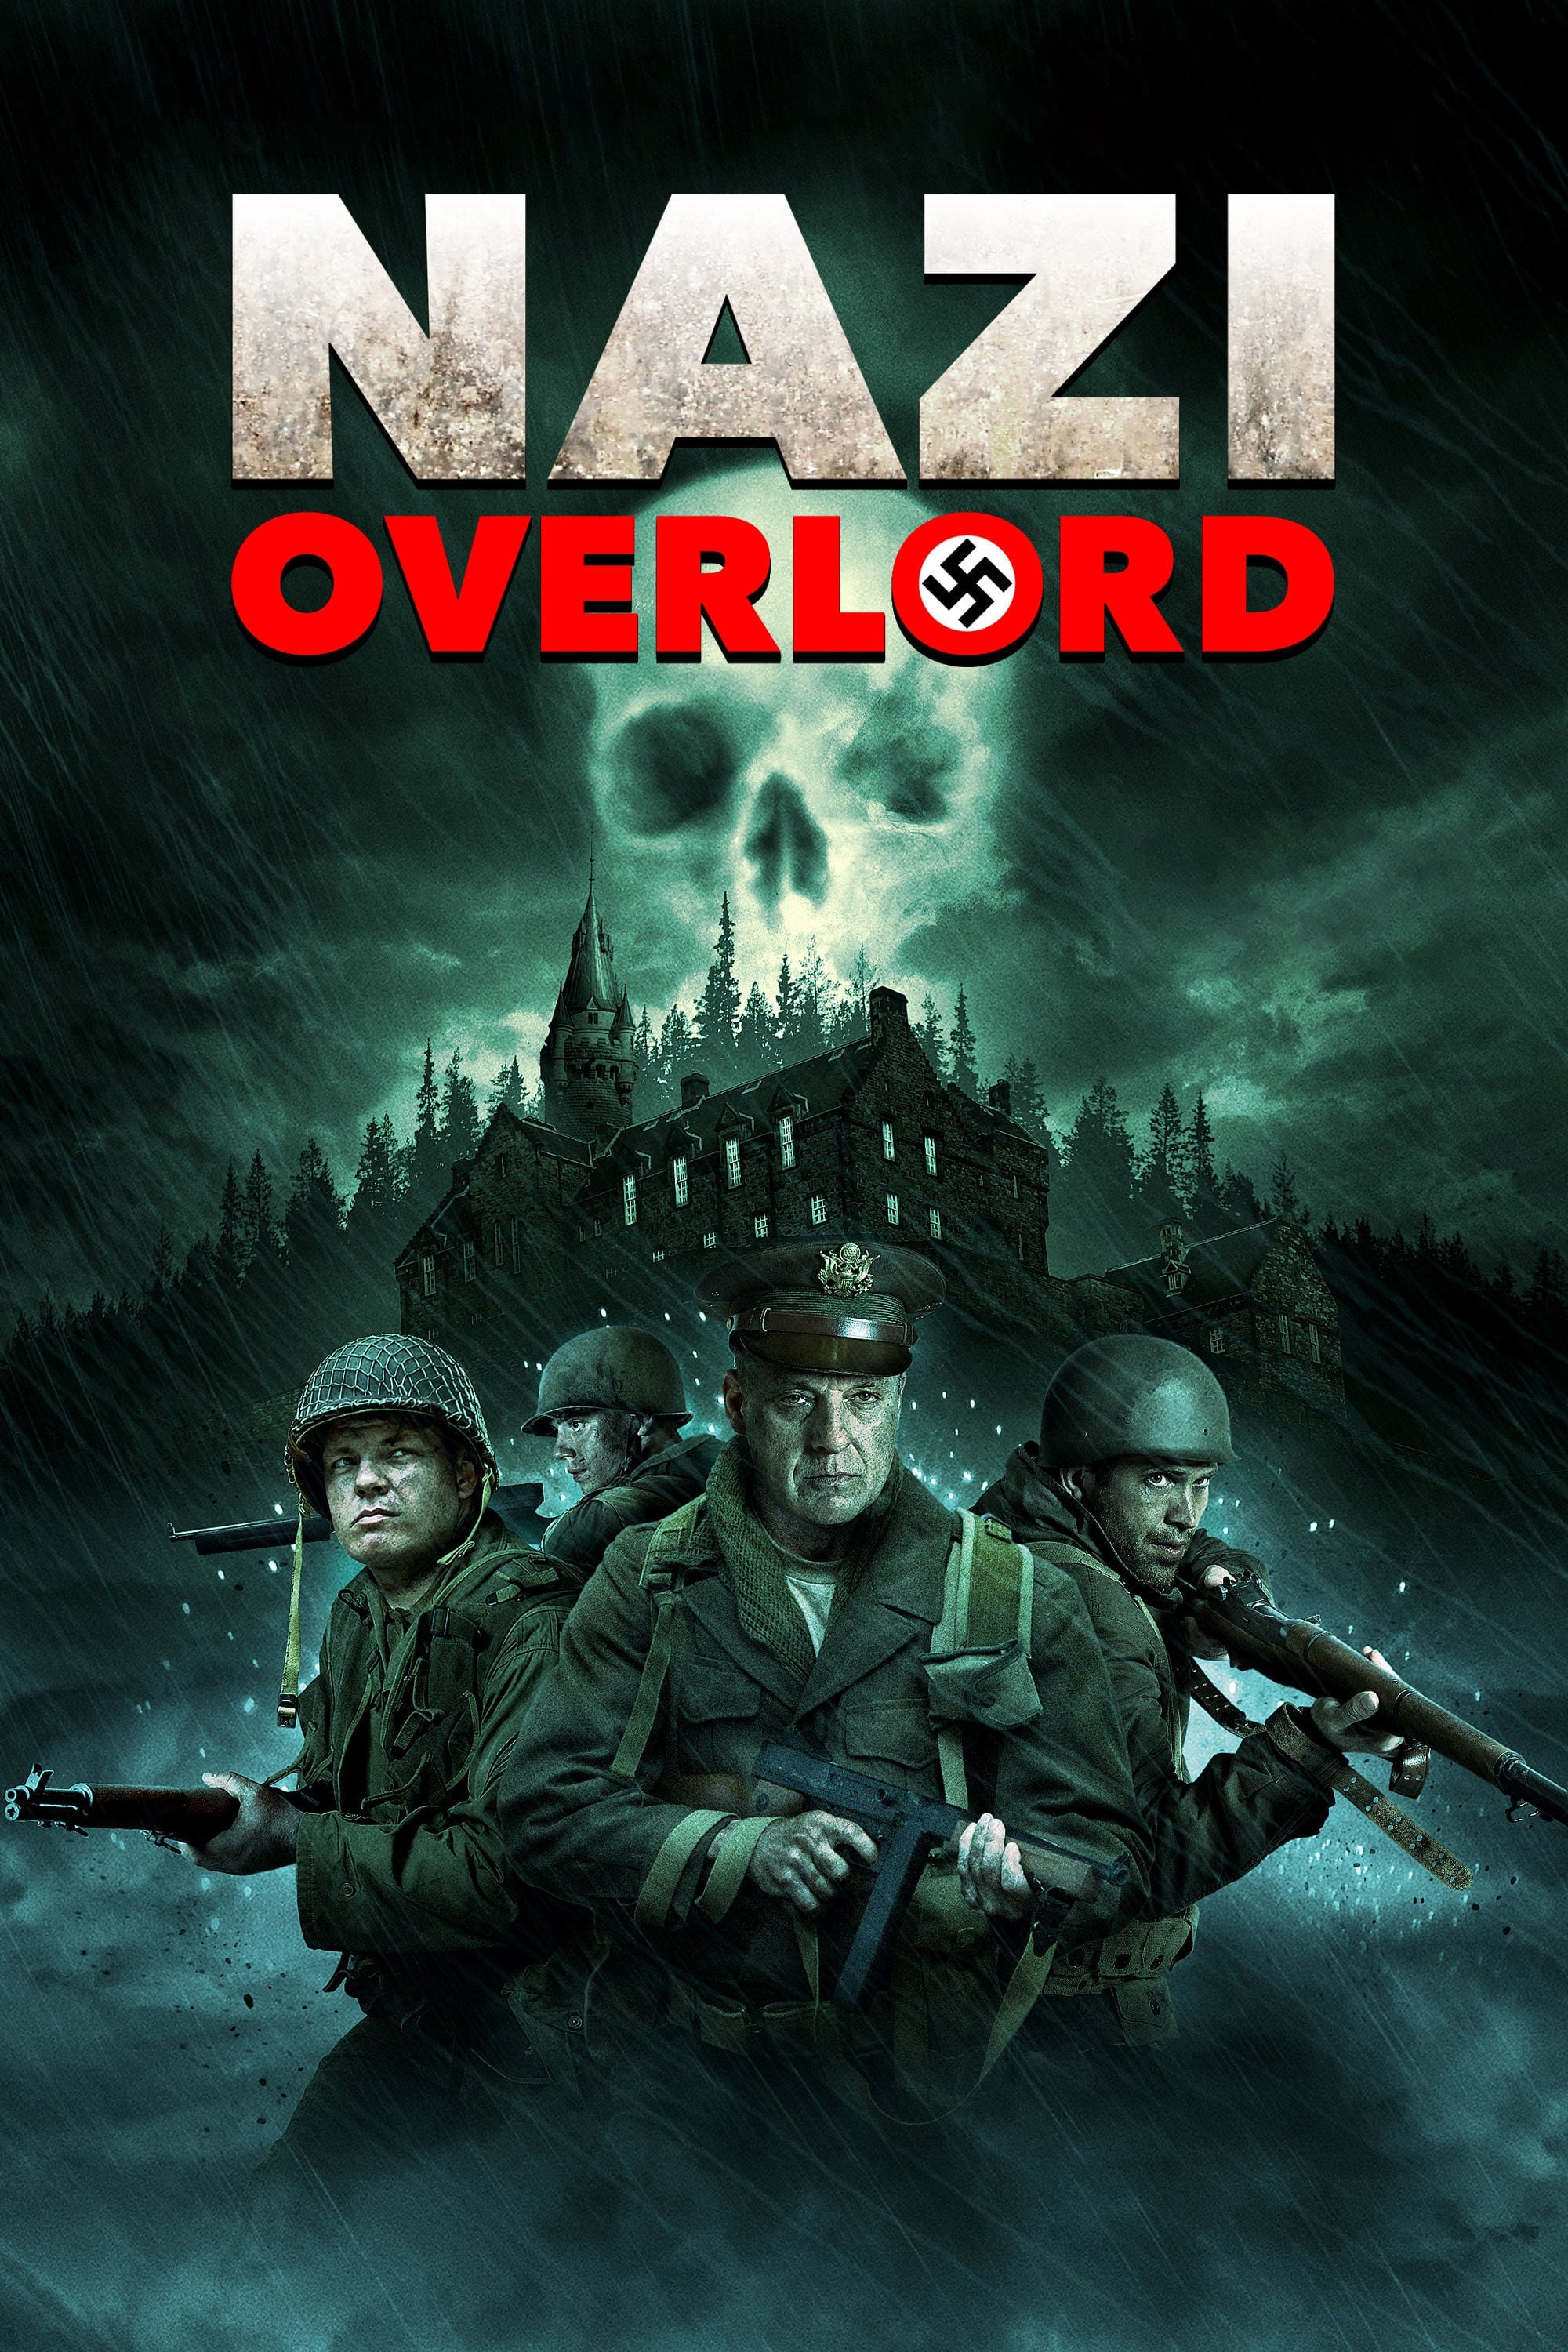 Cuộc Chiến Overlord (Nazi Overlord) [2018]